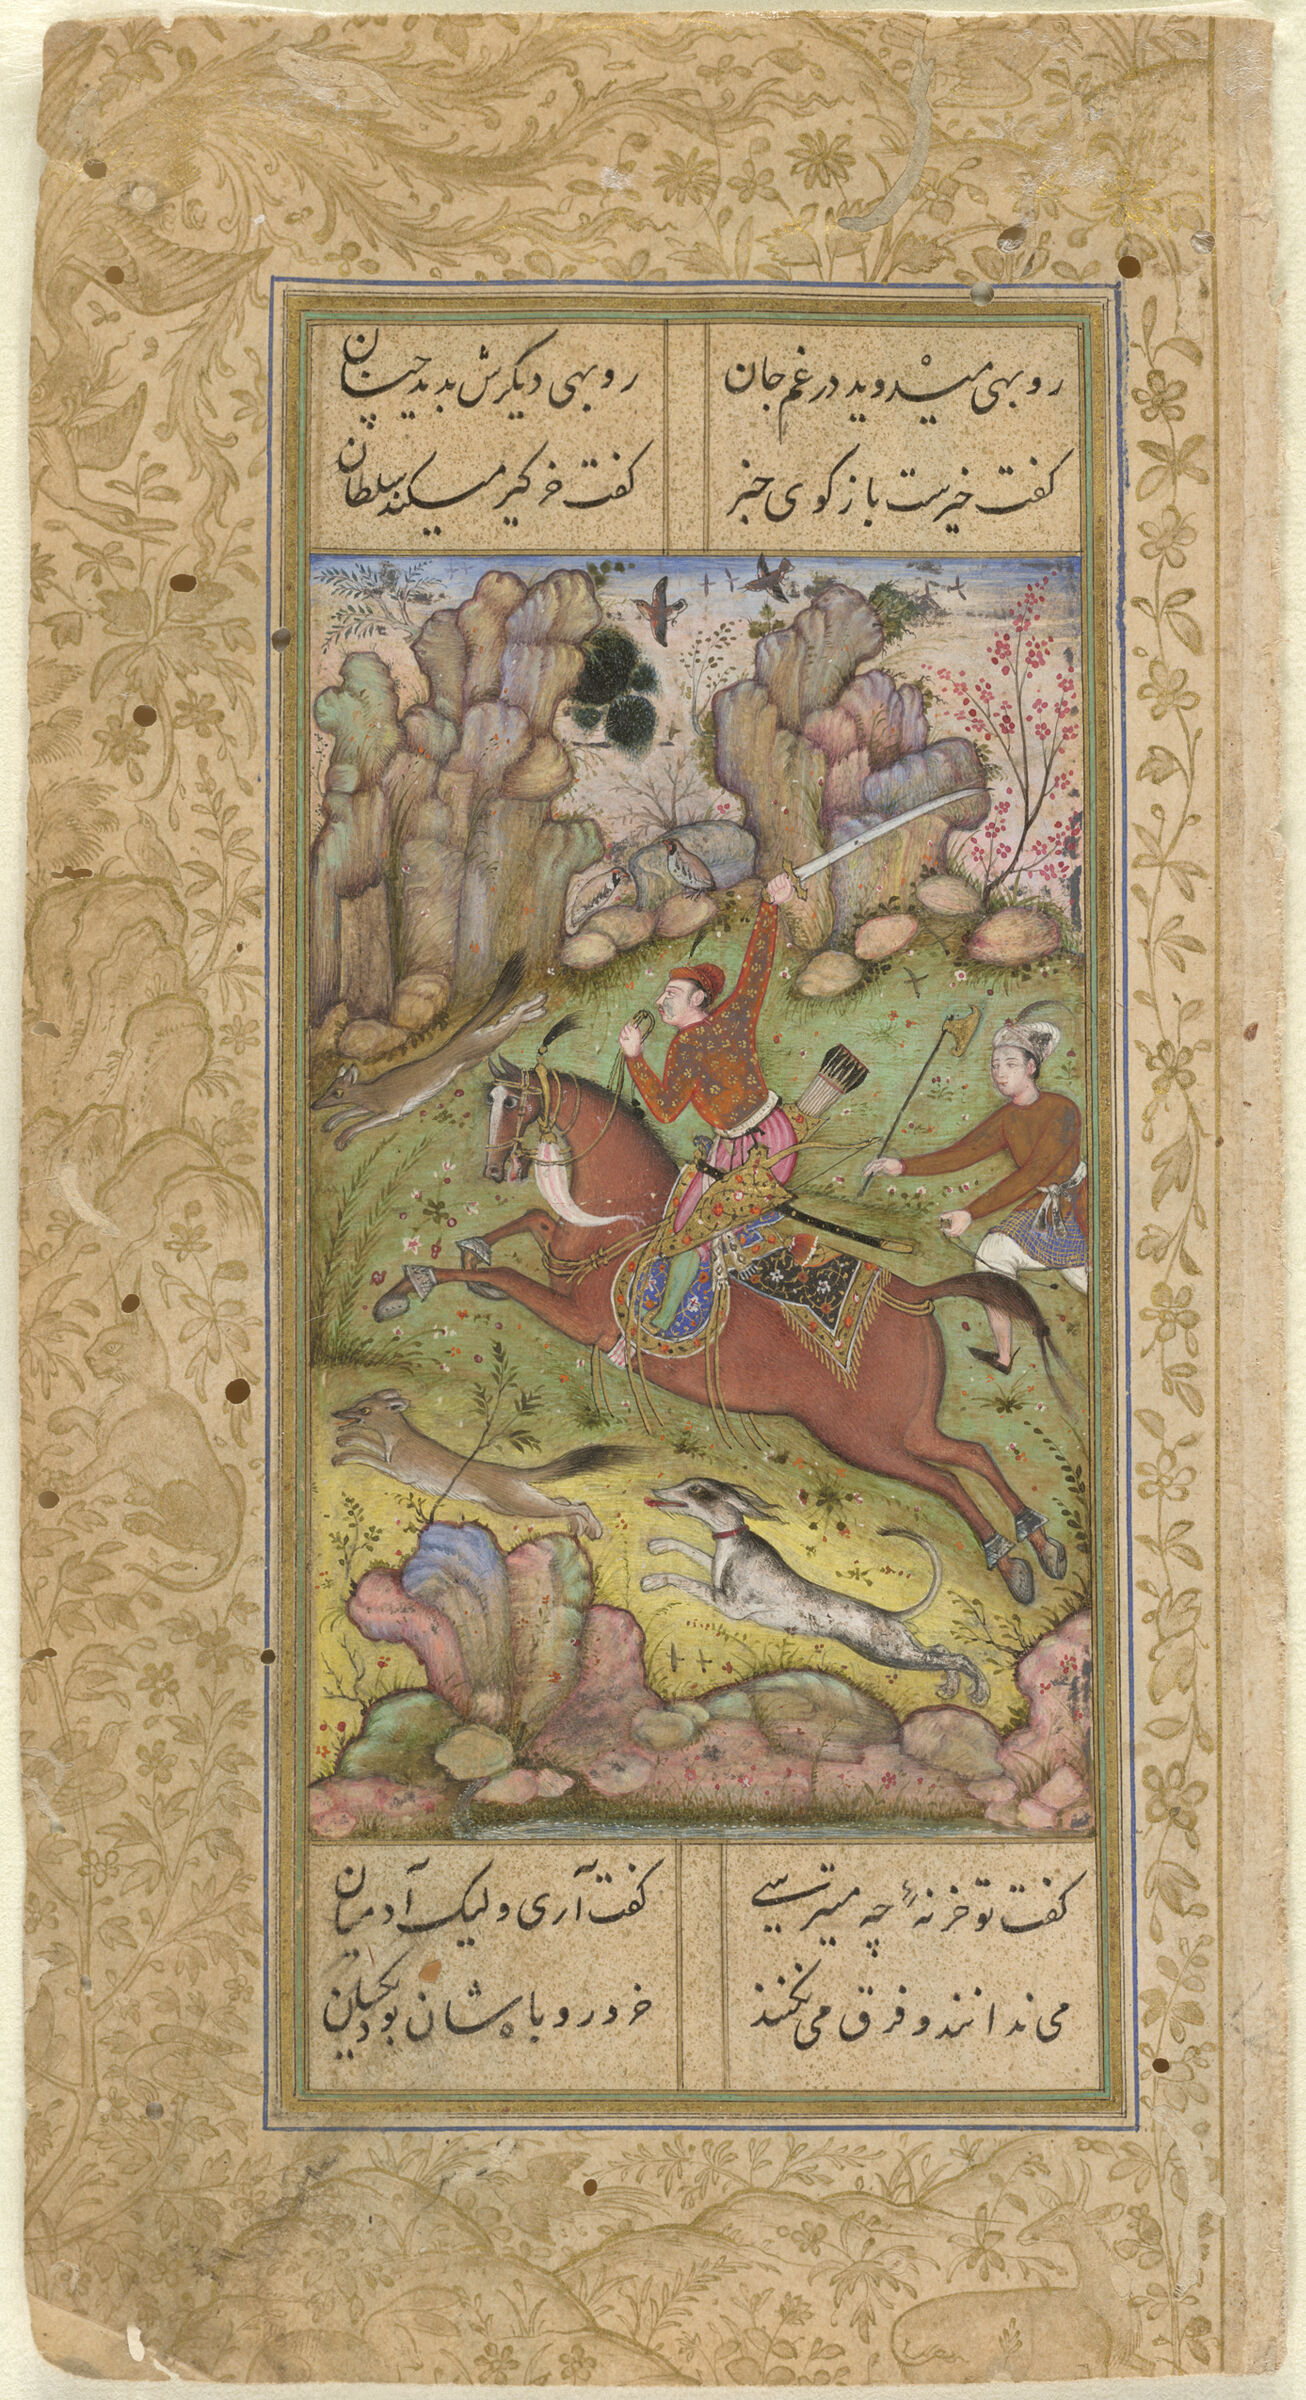 The Fox's Fear (Painting, Recto; Text, Verso), Folio 314 From A Manuscript Of The Divan (Collection Of Works) Of Anvari